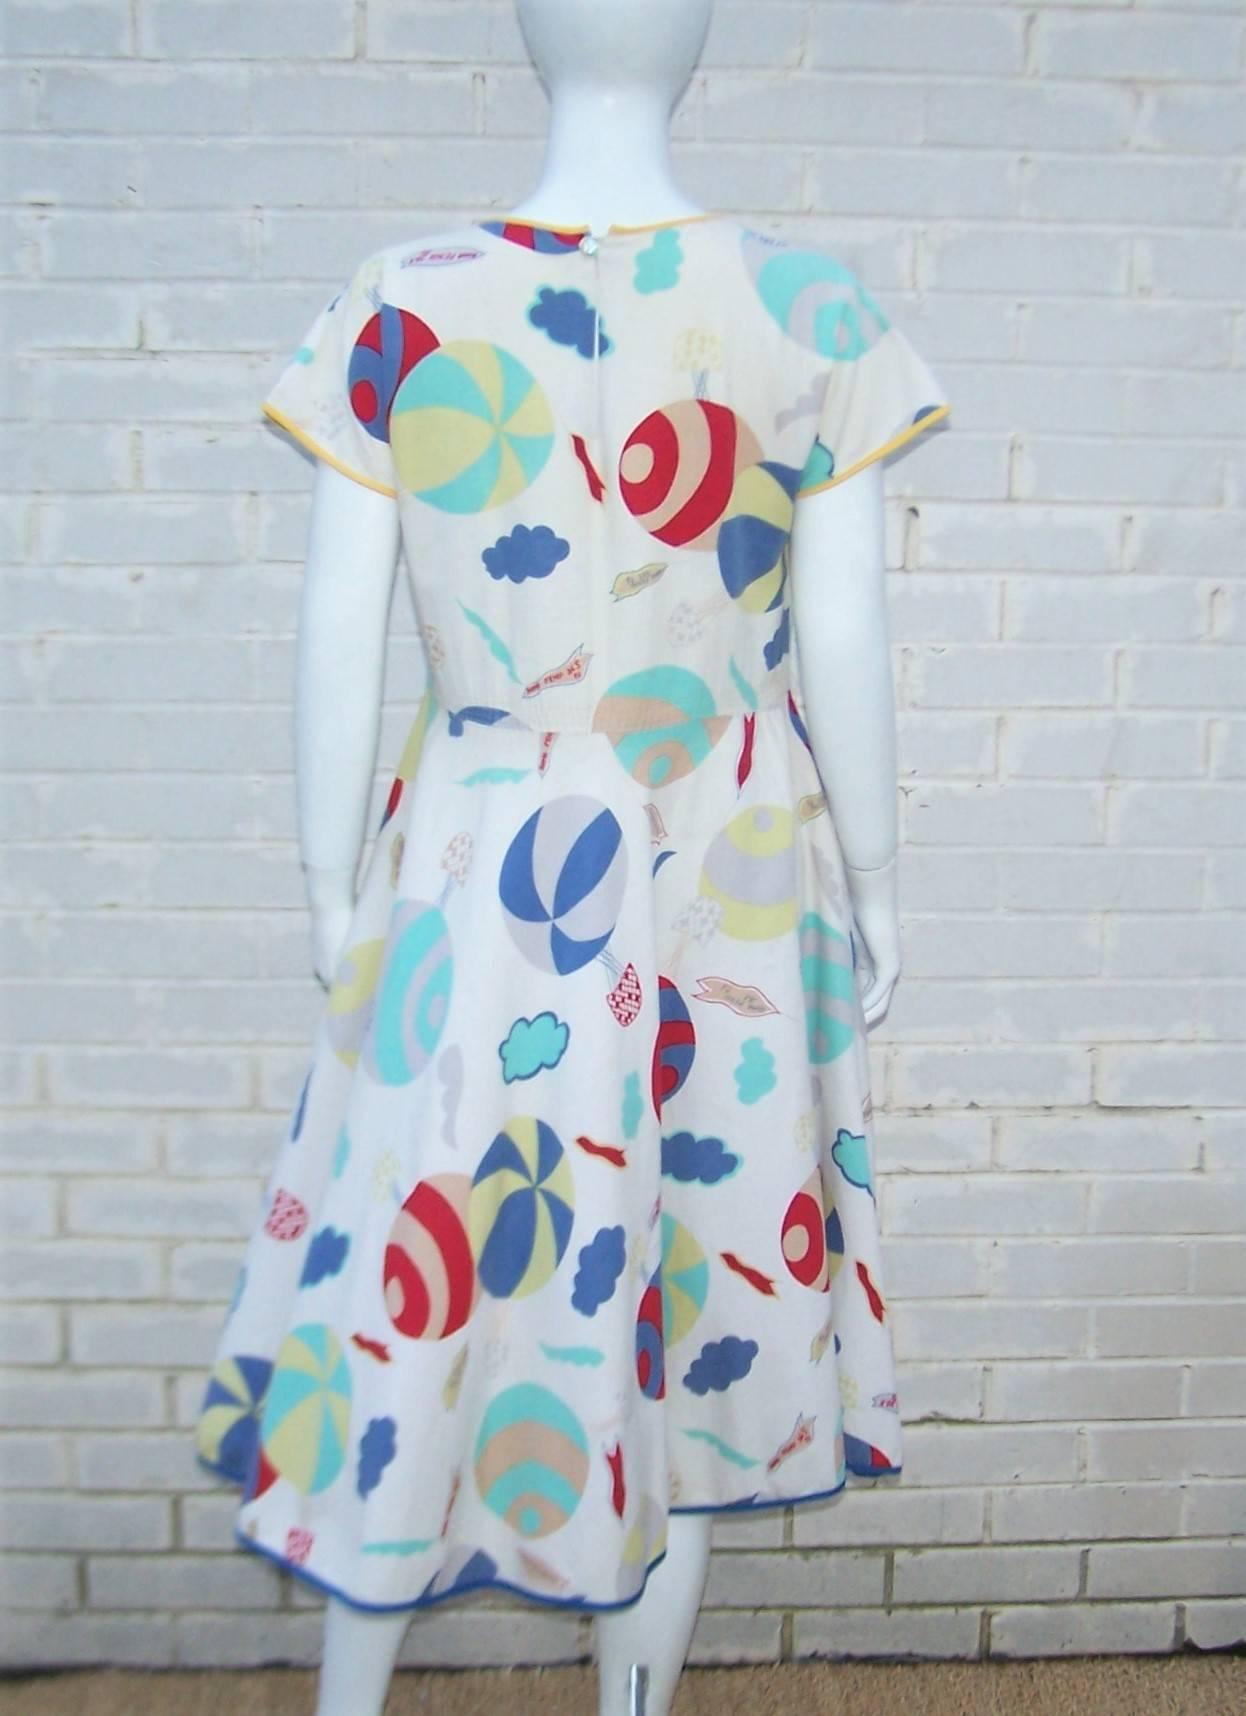 Women's Whimsical 1970's Cotton Day Dress With Hot Air Balloon Logo Print